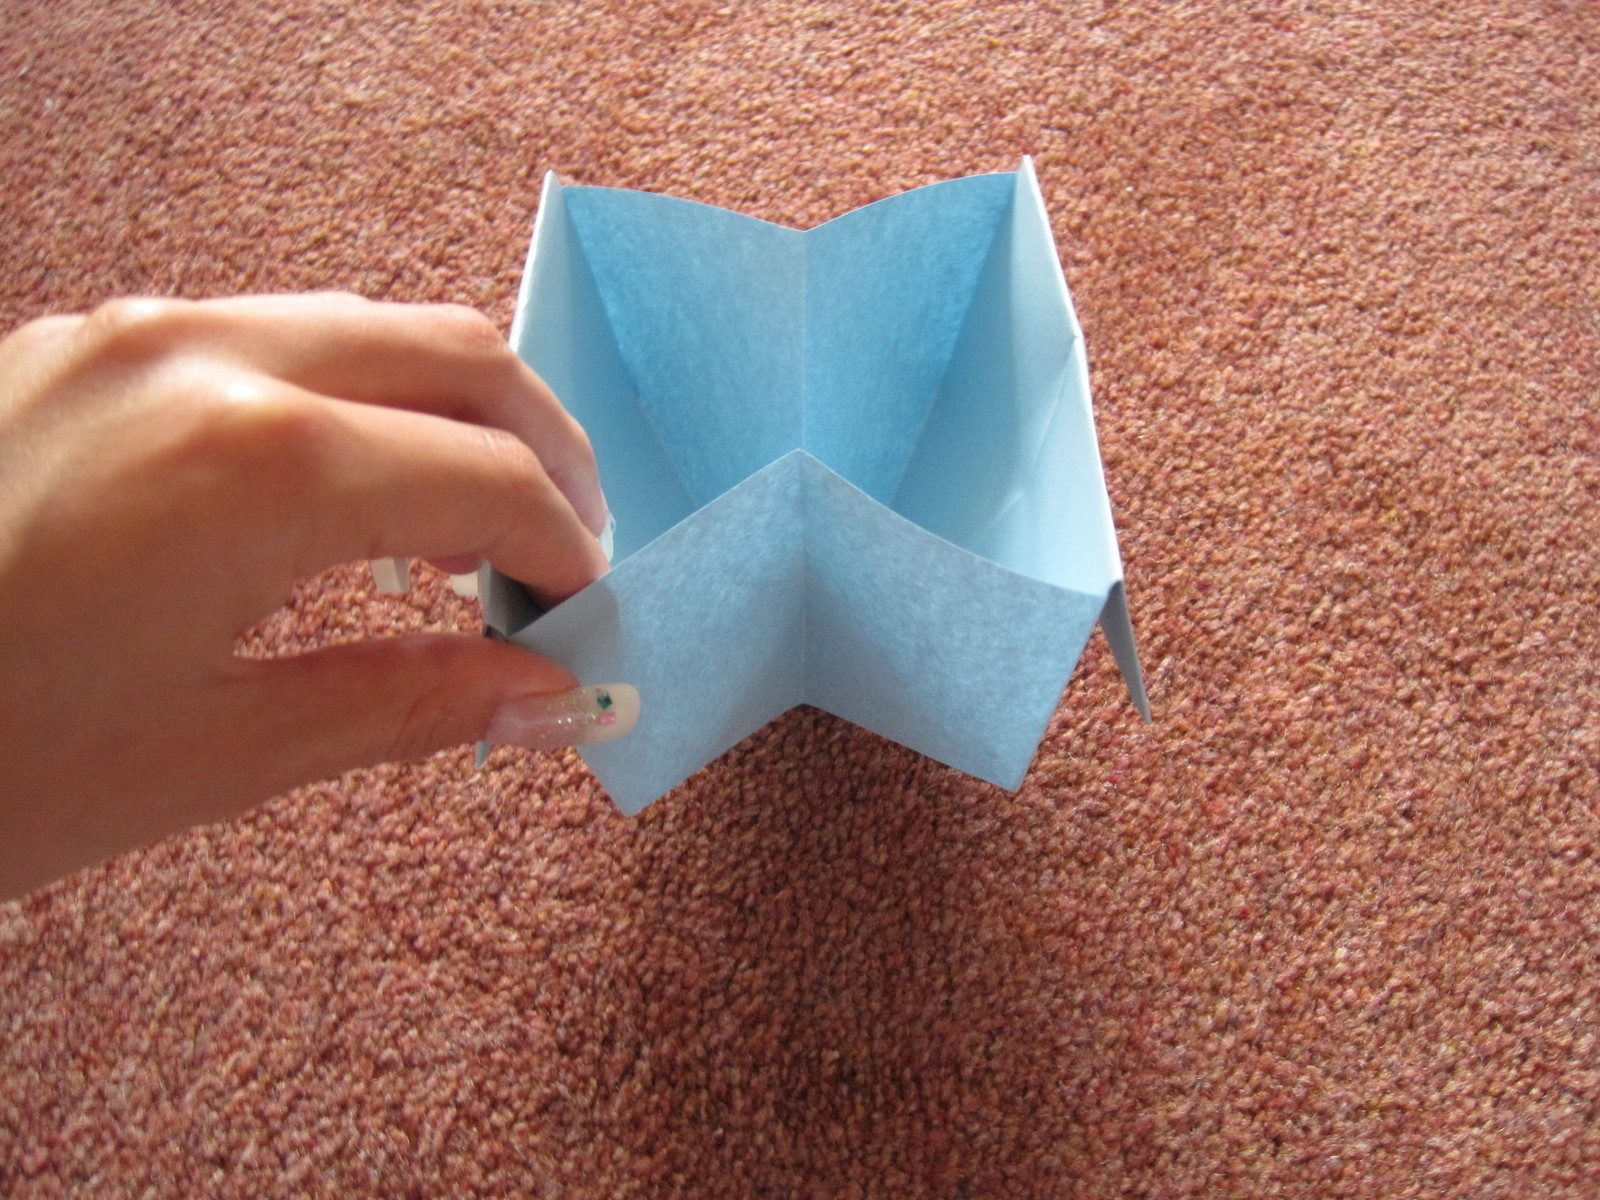 How To Make A Origami Paper Box Quick Origami Disposable Trash Box How To Fold An Origami Box